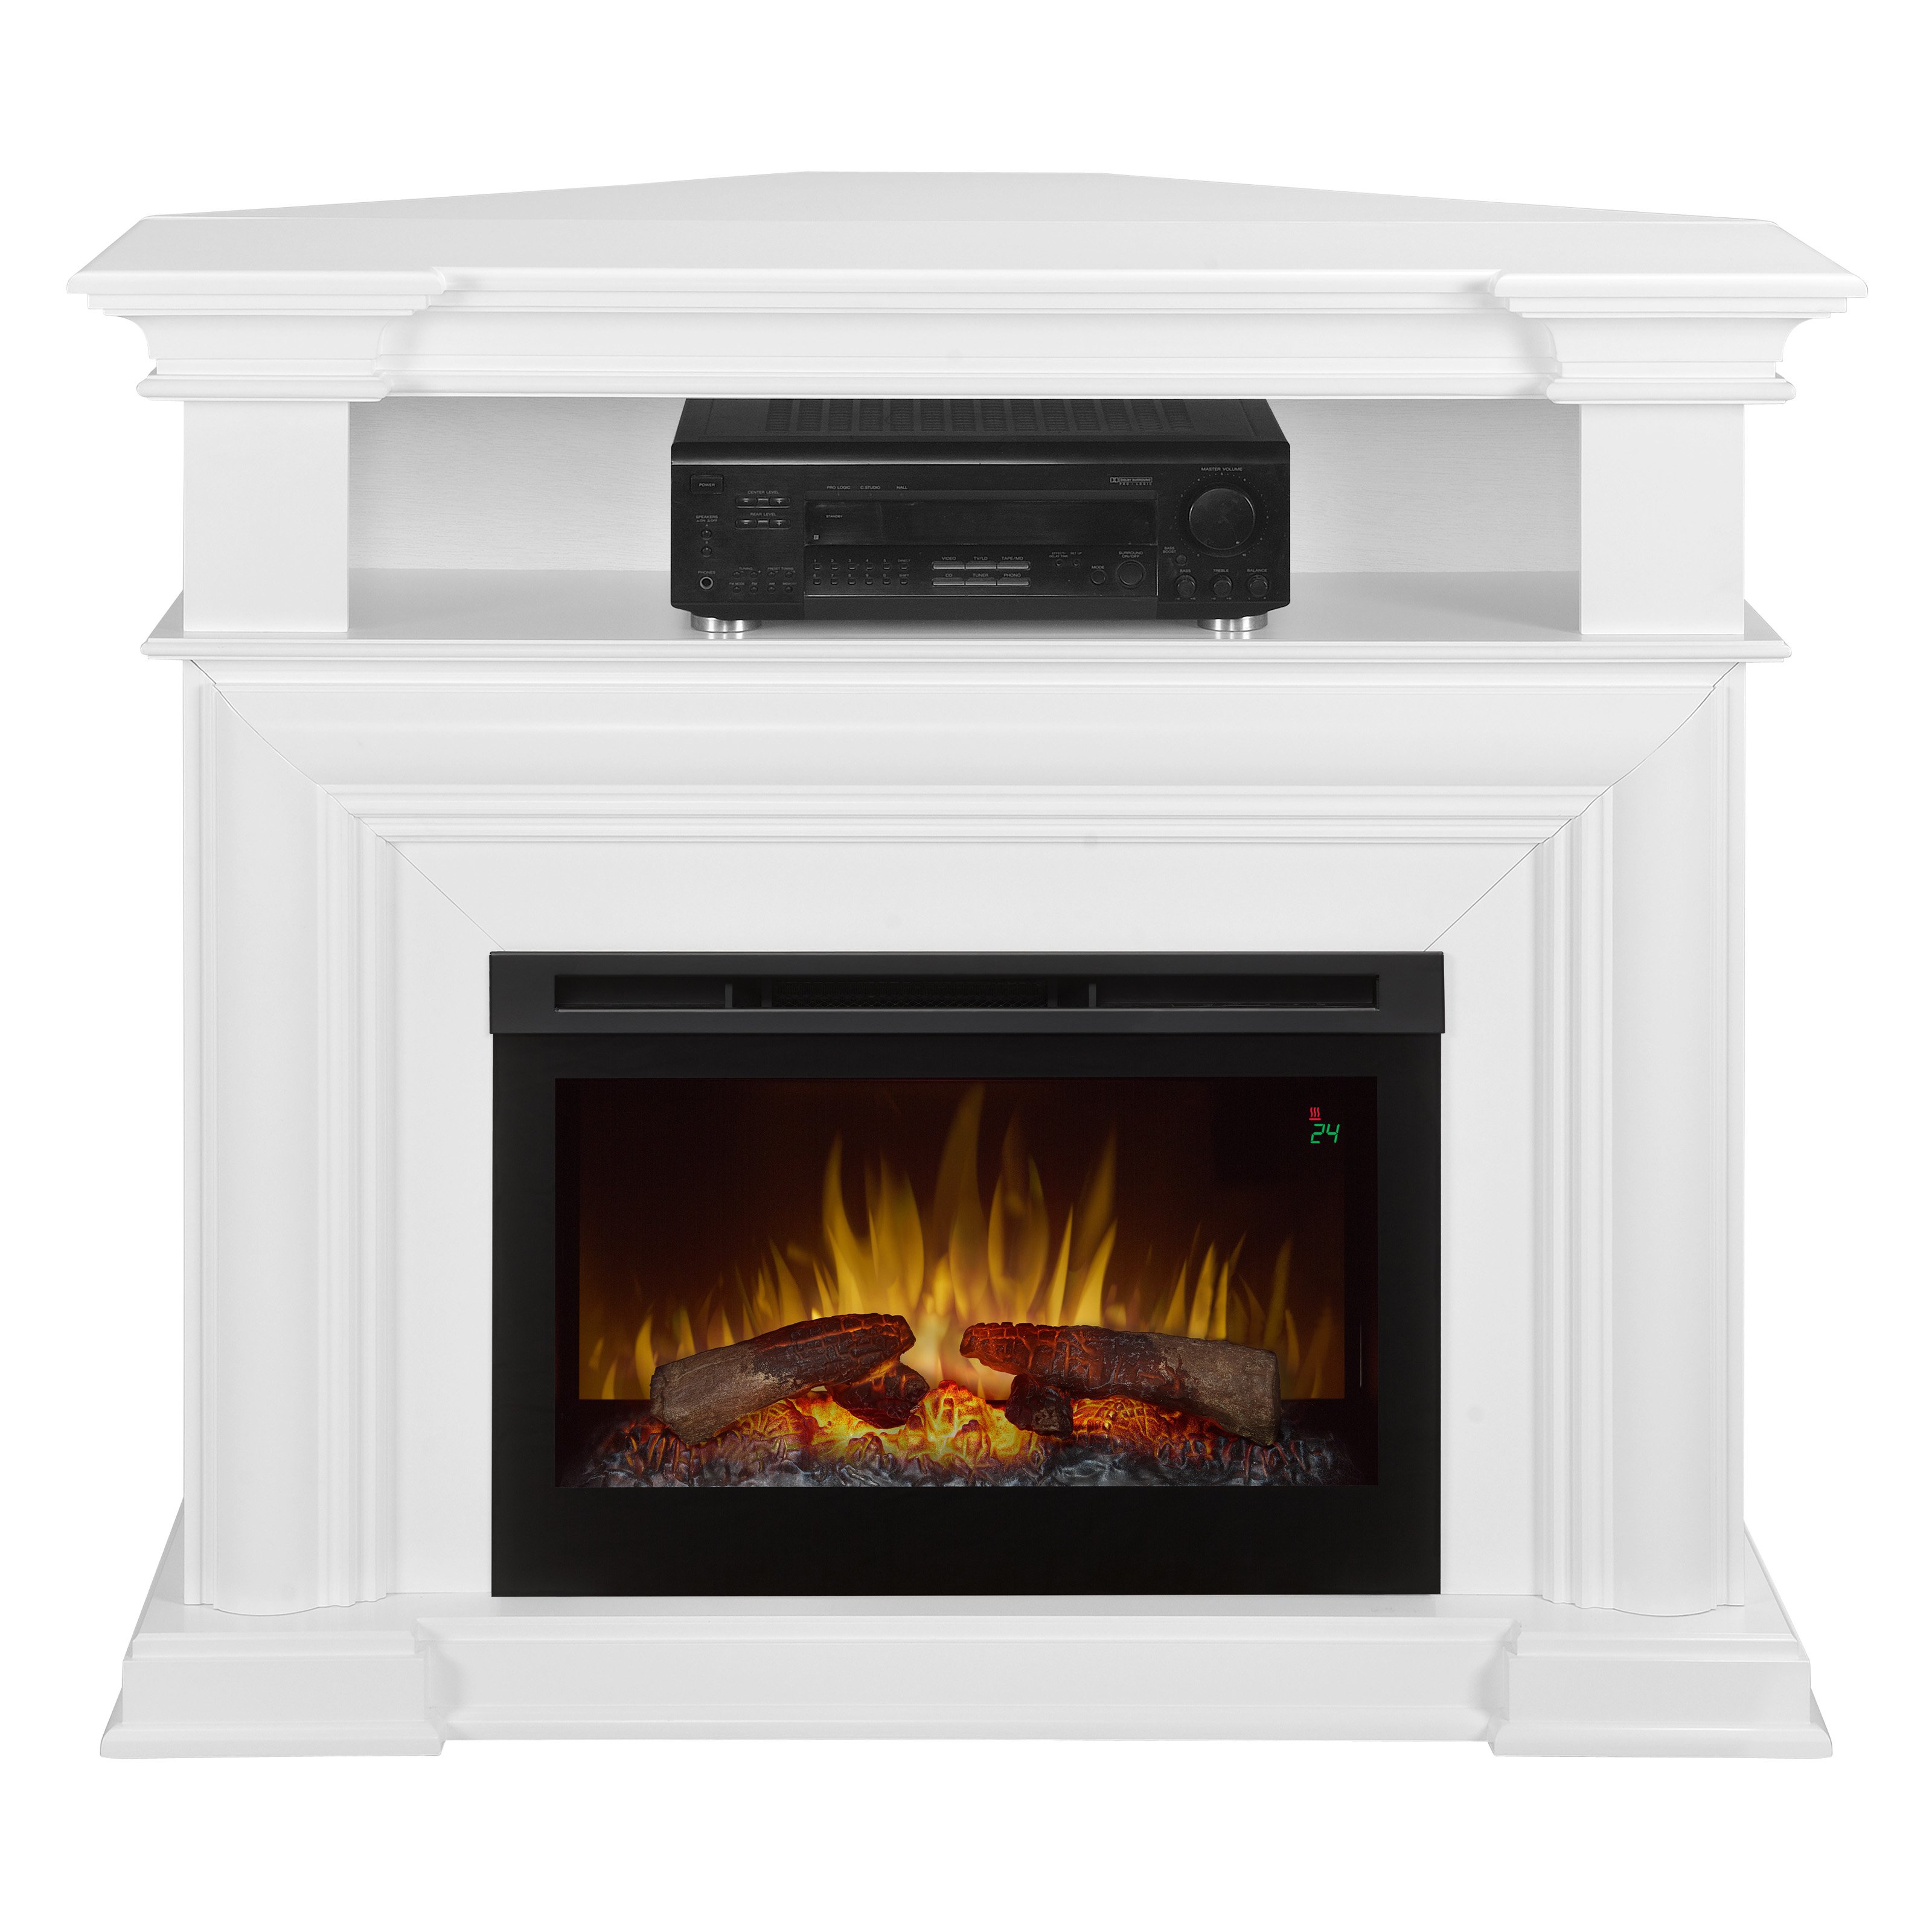 Free Standing Corner Electric Fireplace Lovely Electric Fireplace with Convertible Corner Option and Drop Down Front